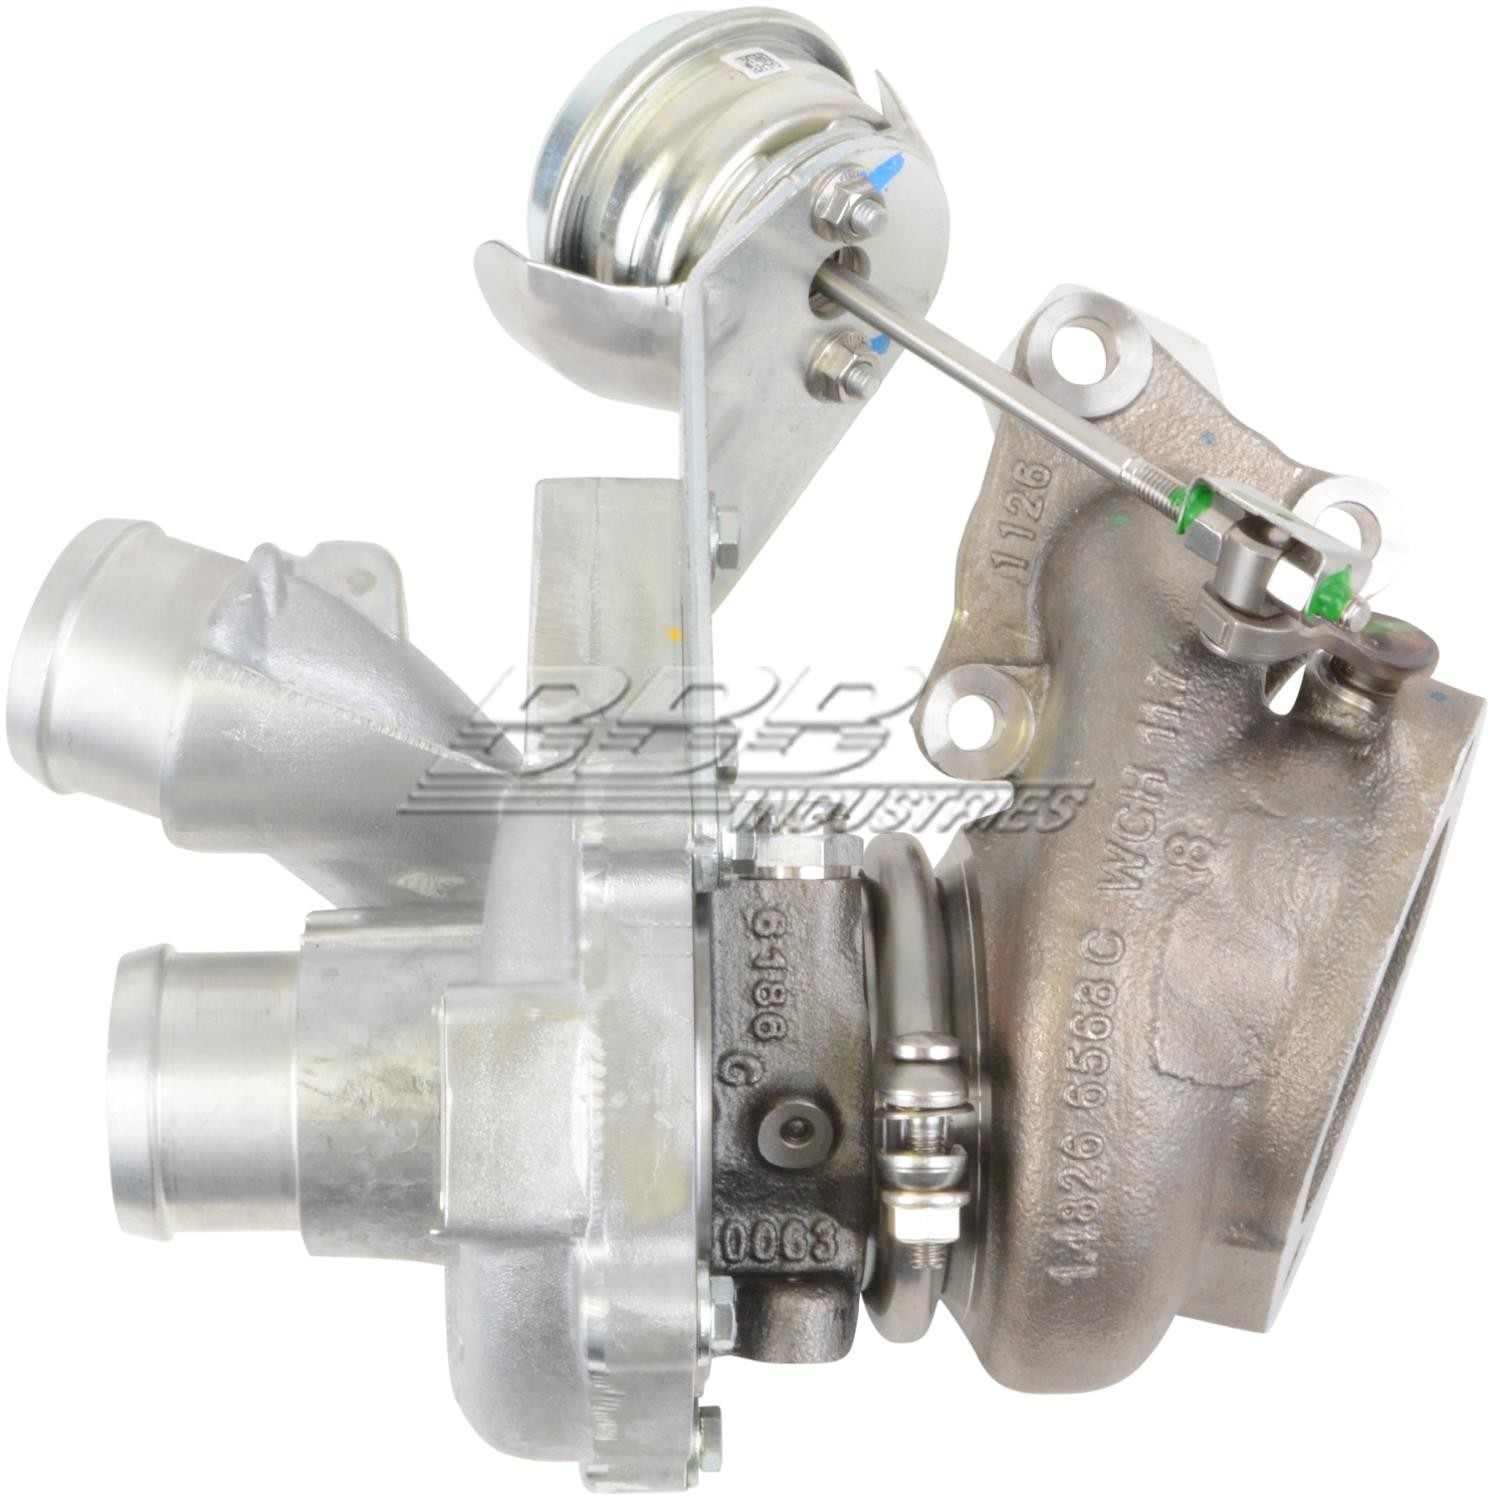 OE-TurboPower Remanufactured Turbocharger  top view frsport G1013